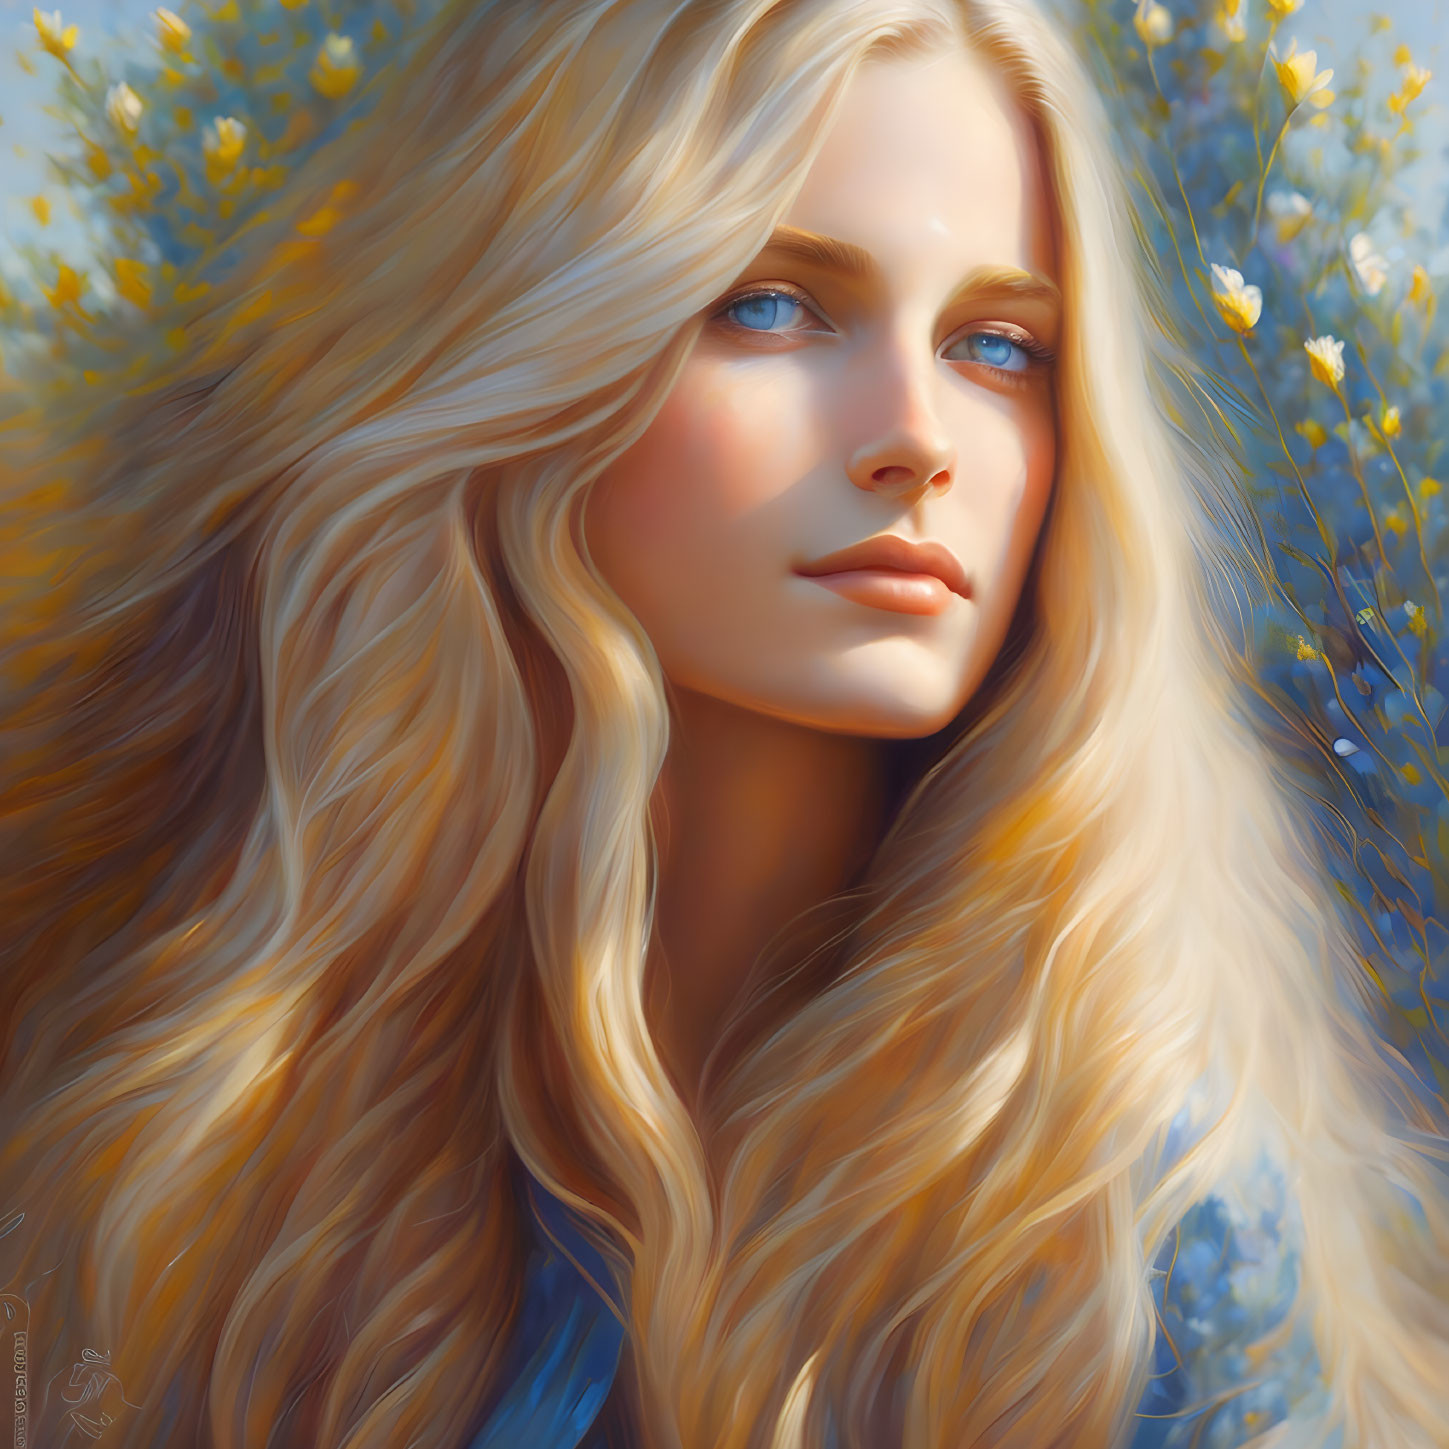 Blonde woman with blue eyes in digital portrait surrounded by yellow flowers